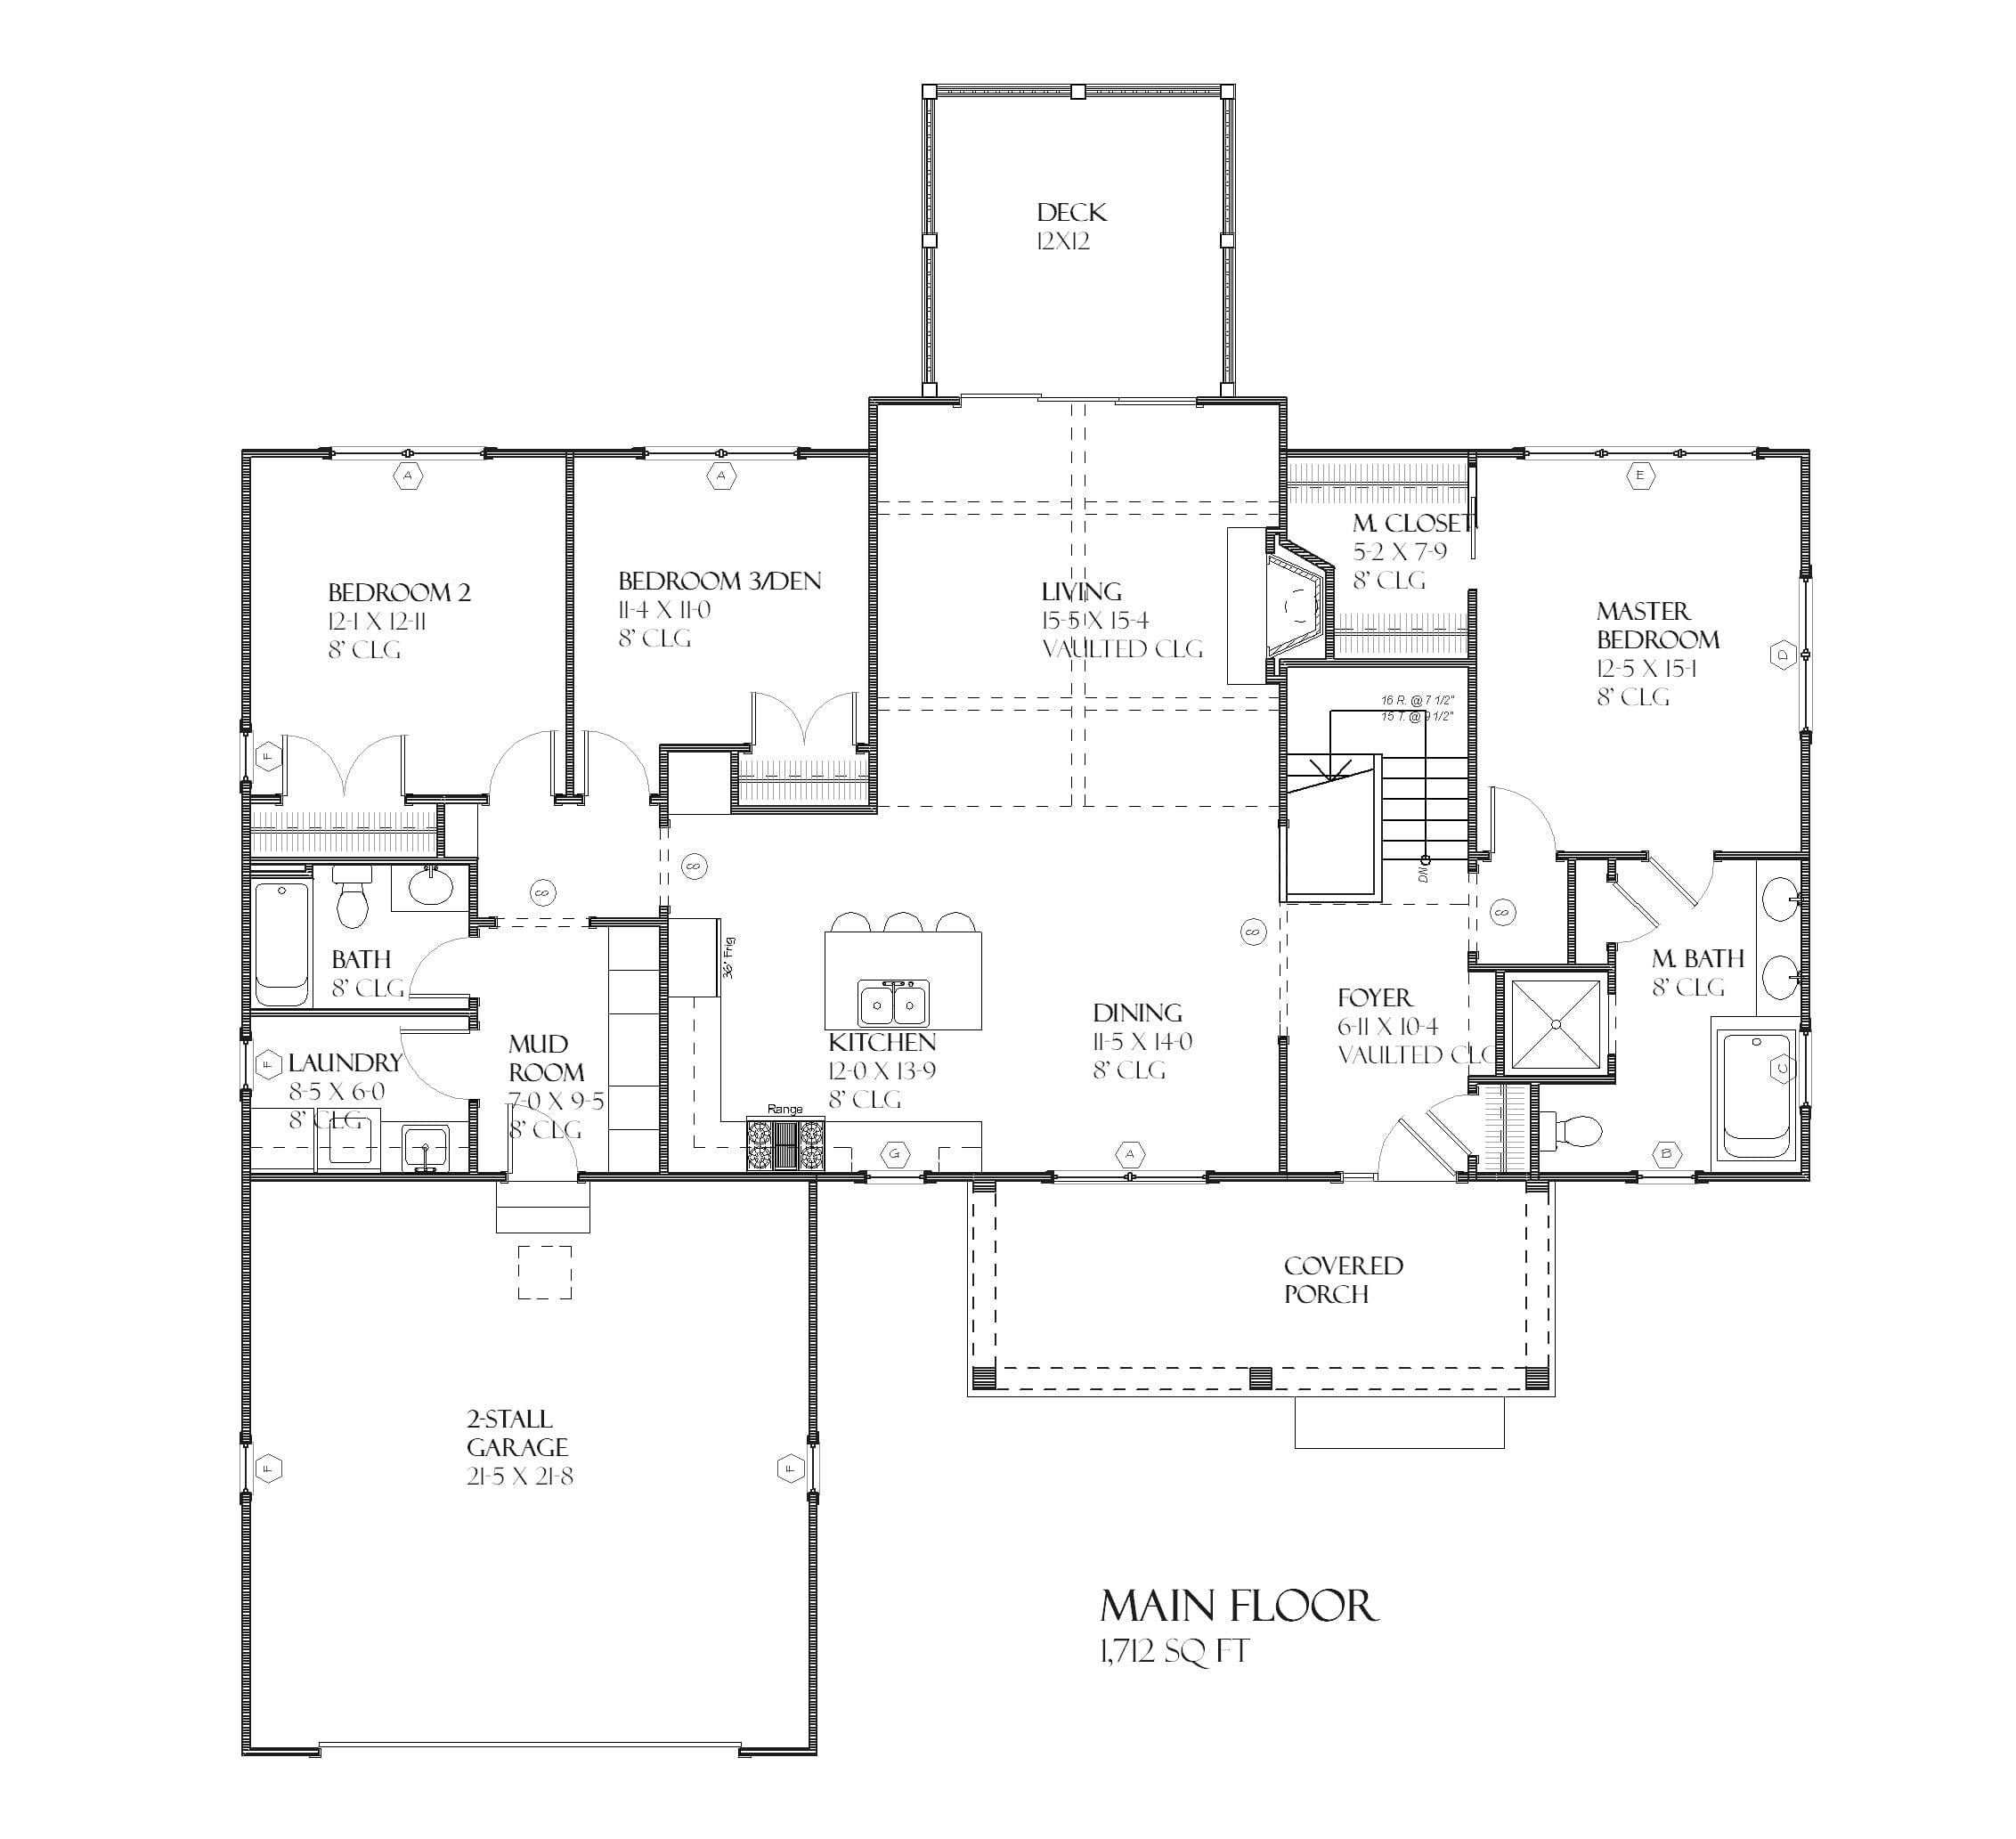 Mesquite - Home Design and Floor Plan - SketchPad House Plans